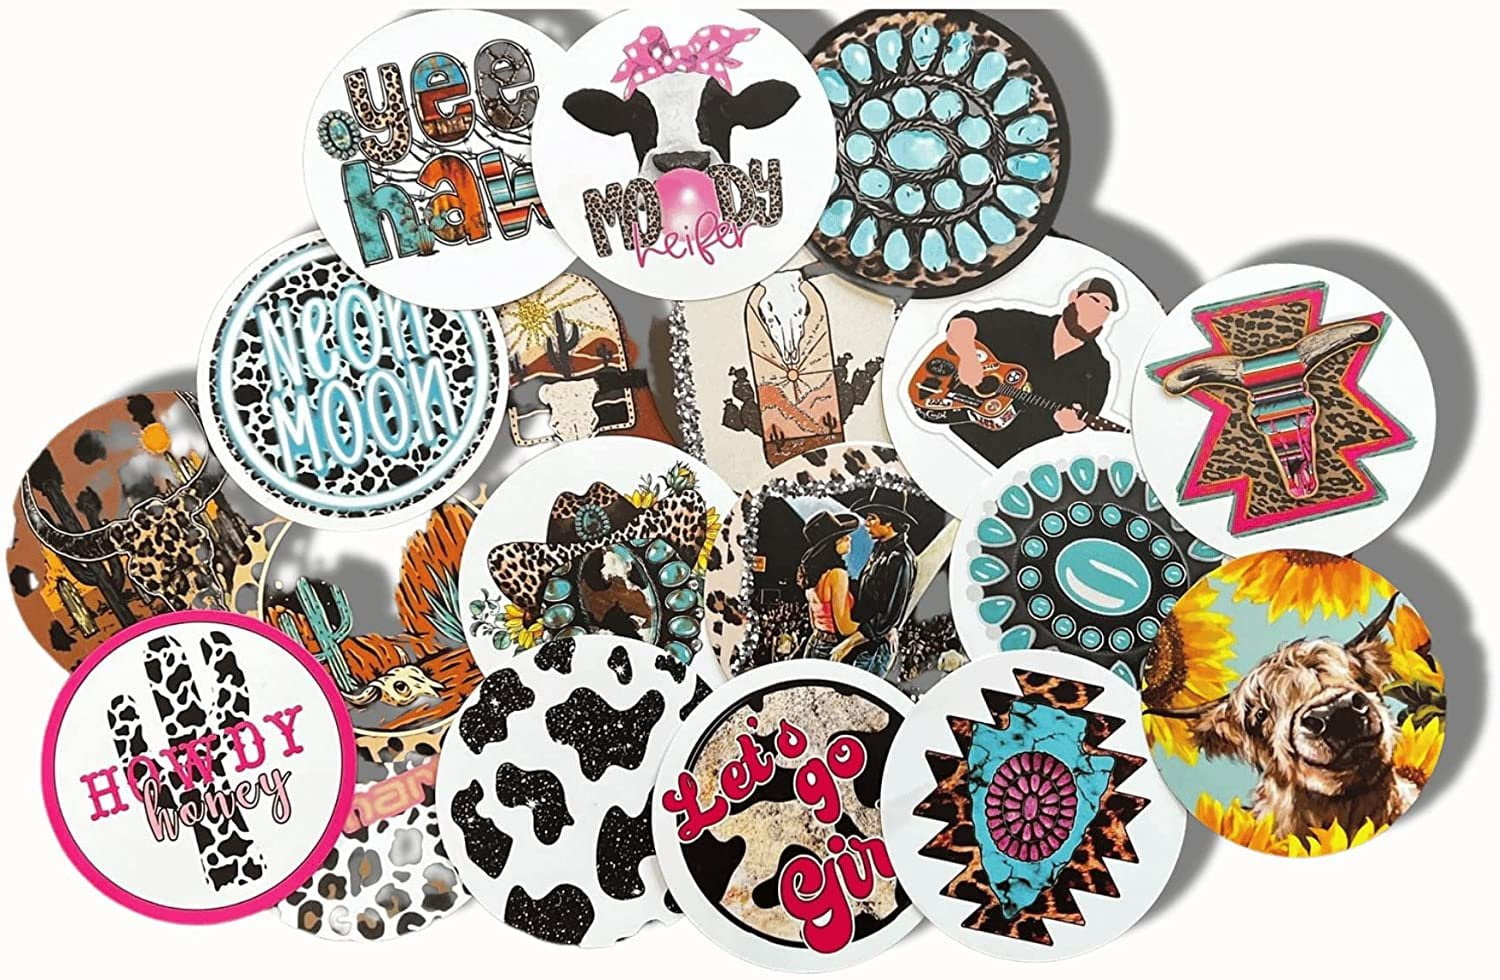 Freshie Sports Cardstock Cutouts Rounds 3” inch for Freshies Random Mix |  12 pk | For Scented Aroma Beads Bake with Mold for Car Freshie Designs